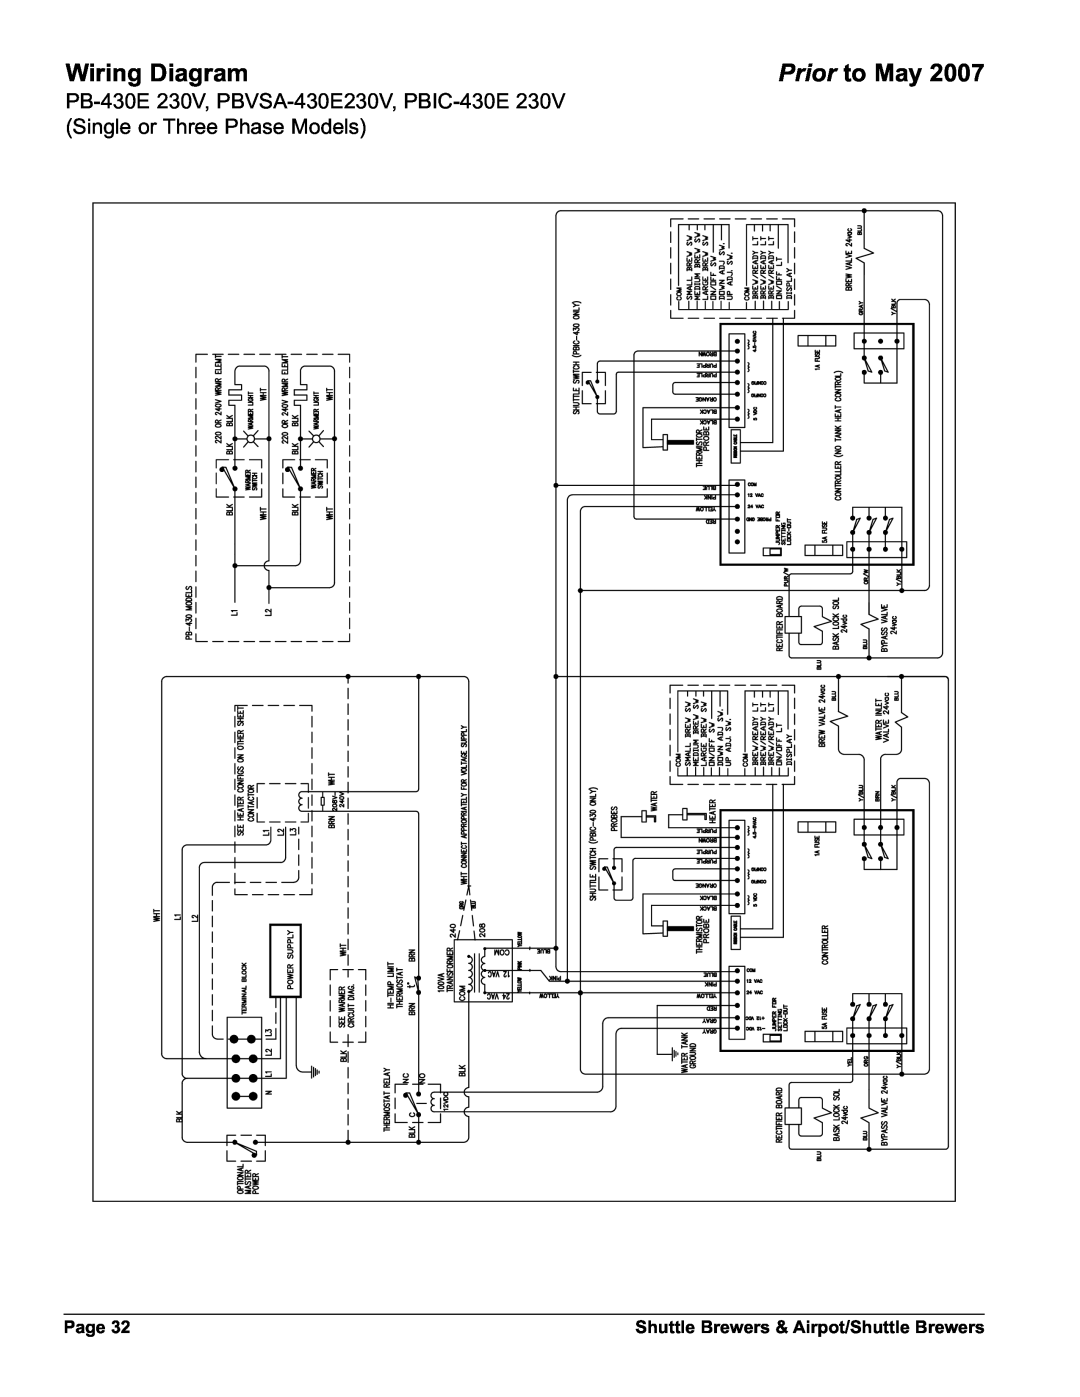 Grindmaster AM-344-04 instruction manual Wiring Diagram, Prior to May, Page, Shuttle Brewers & Airpot/Shuttle Brewers 